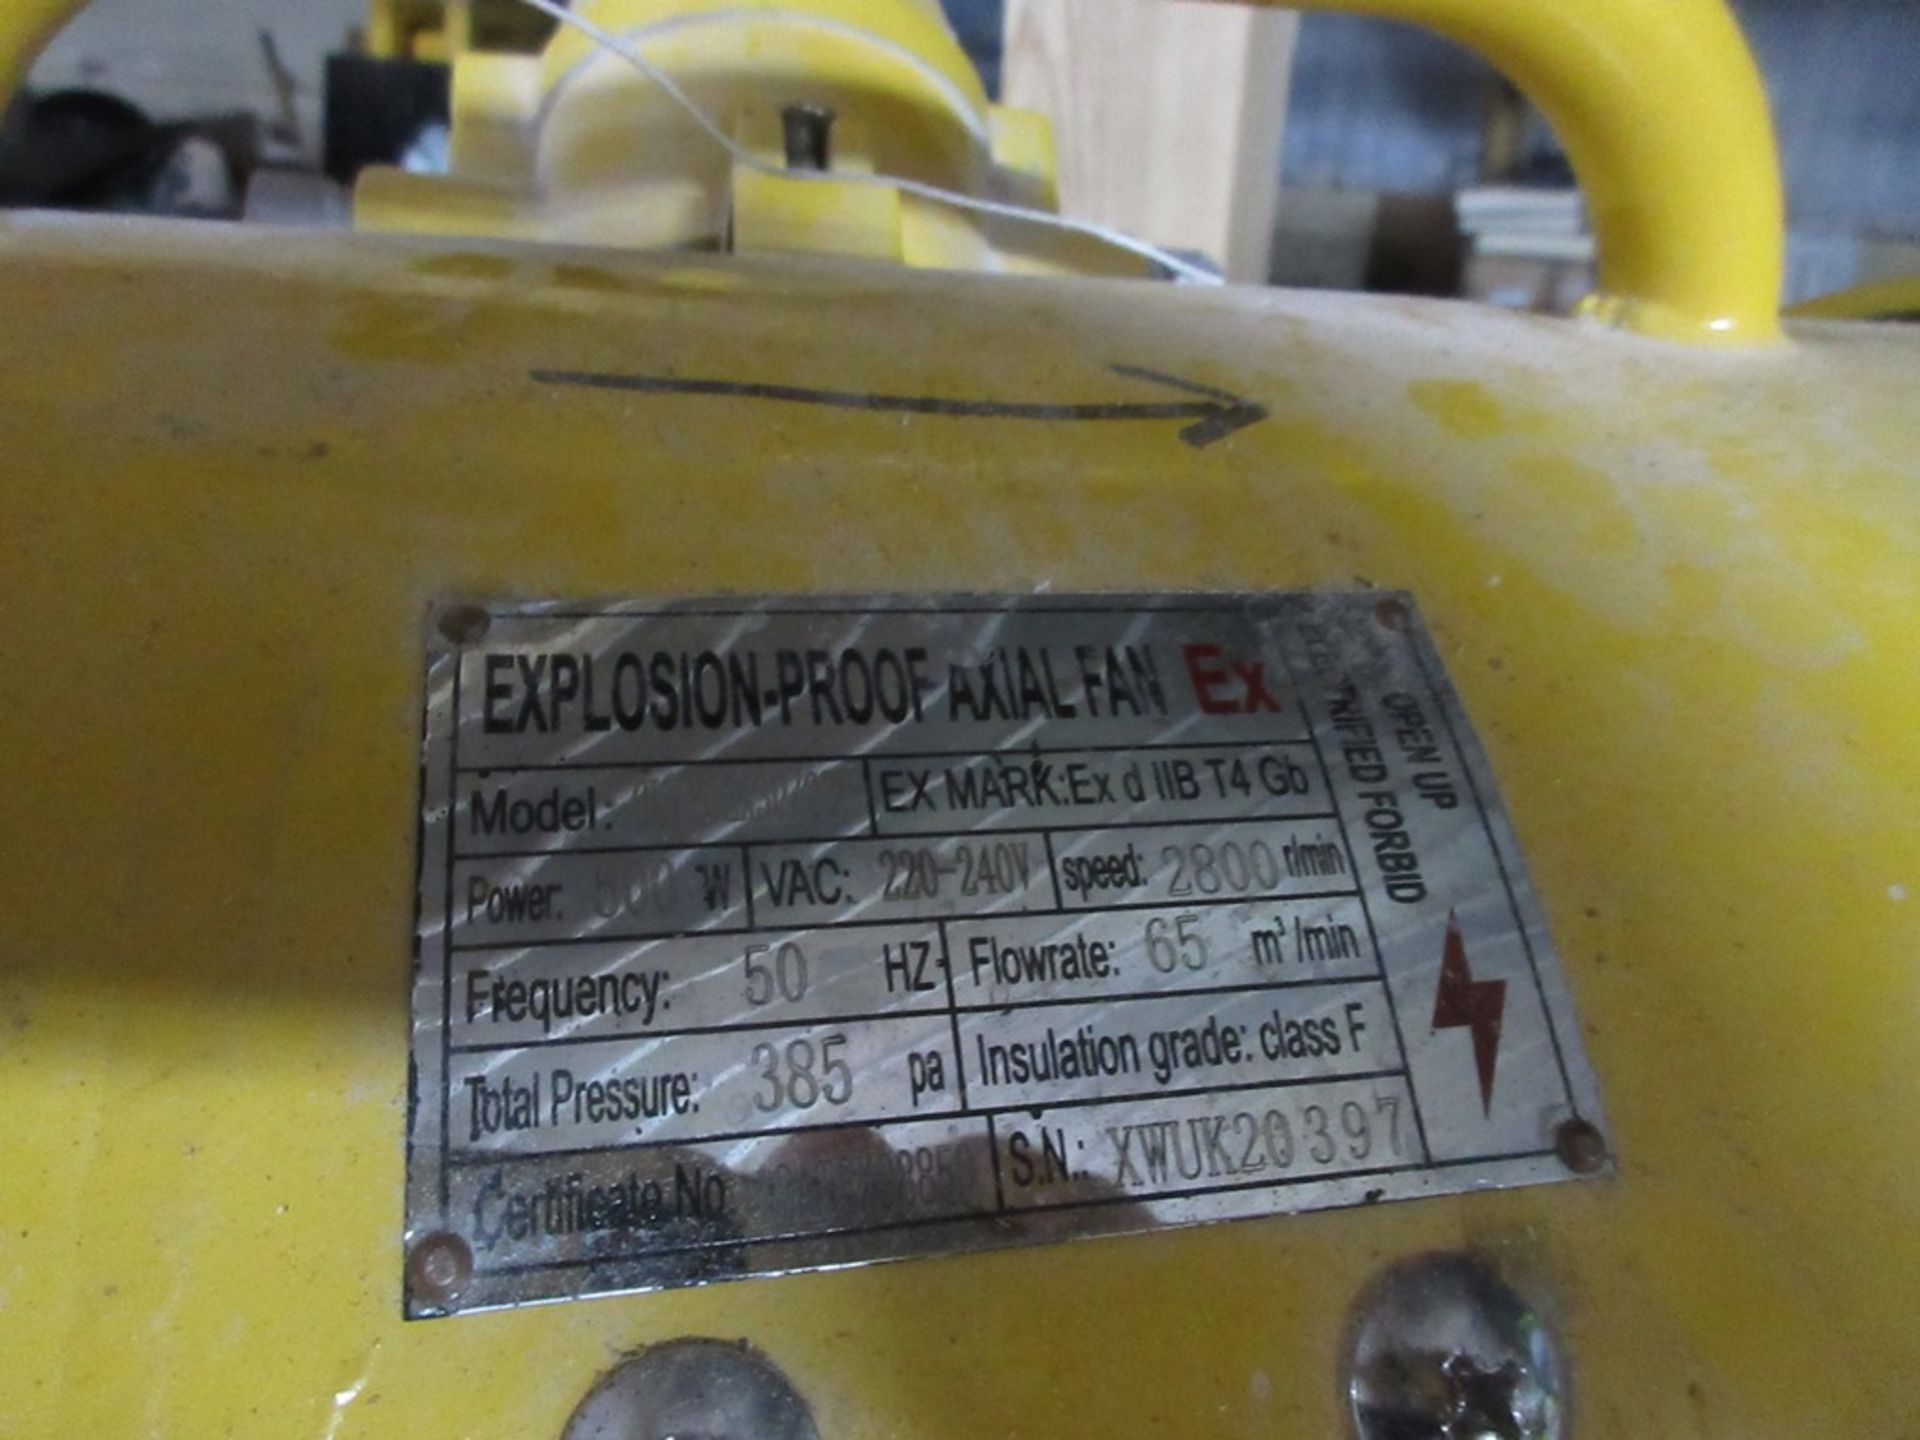 Jet Flow portable explosion proof axial fan, 240v - Image 2 of 4